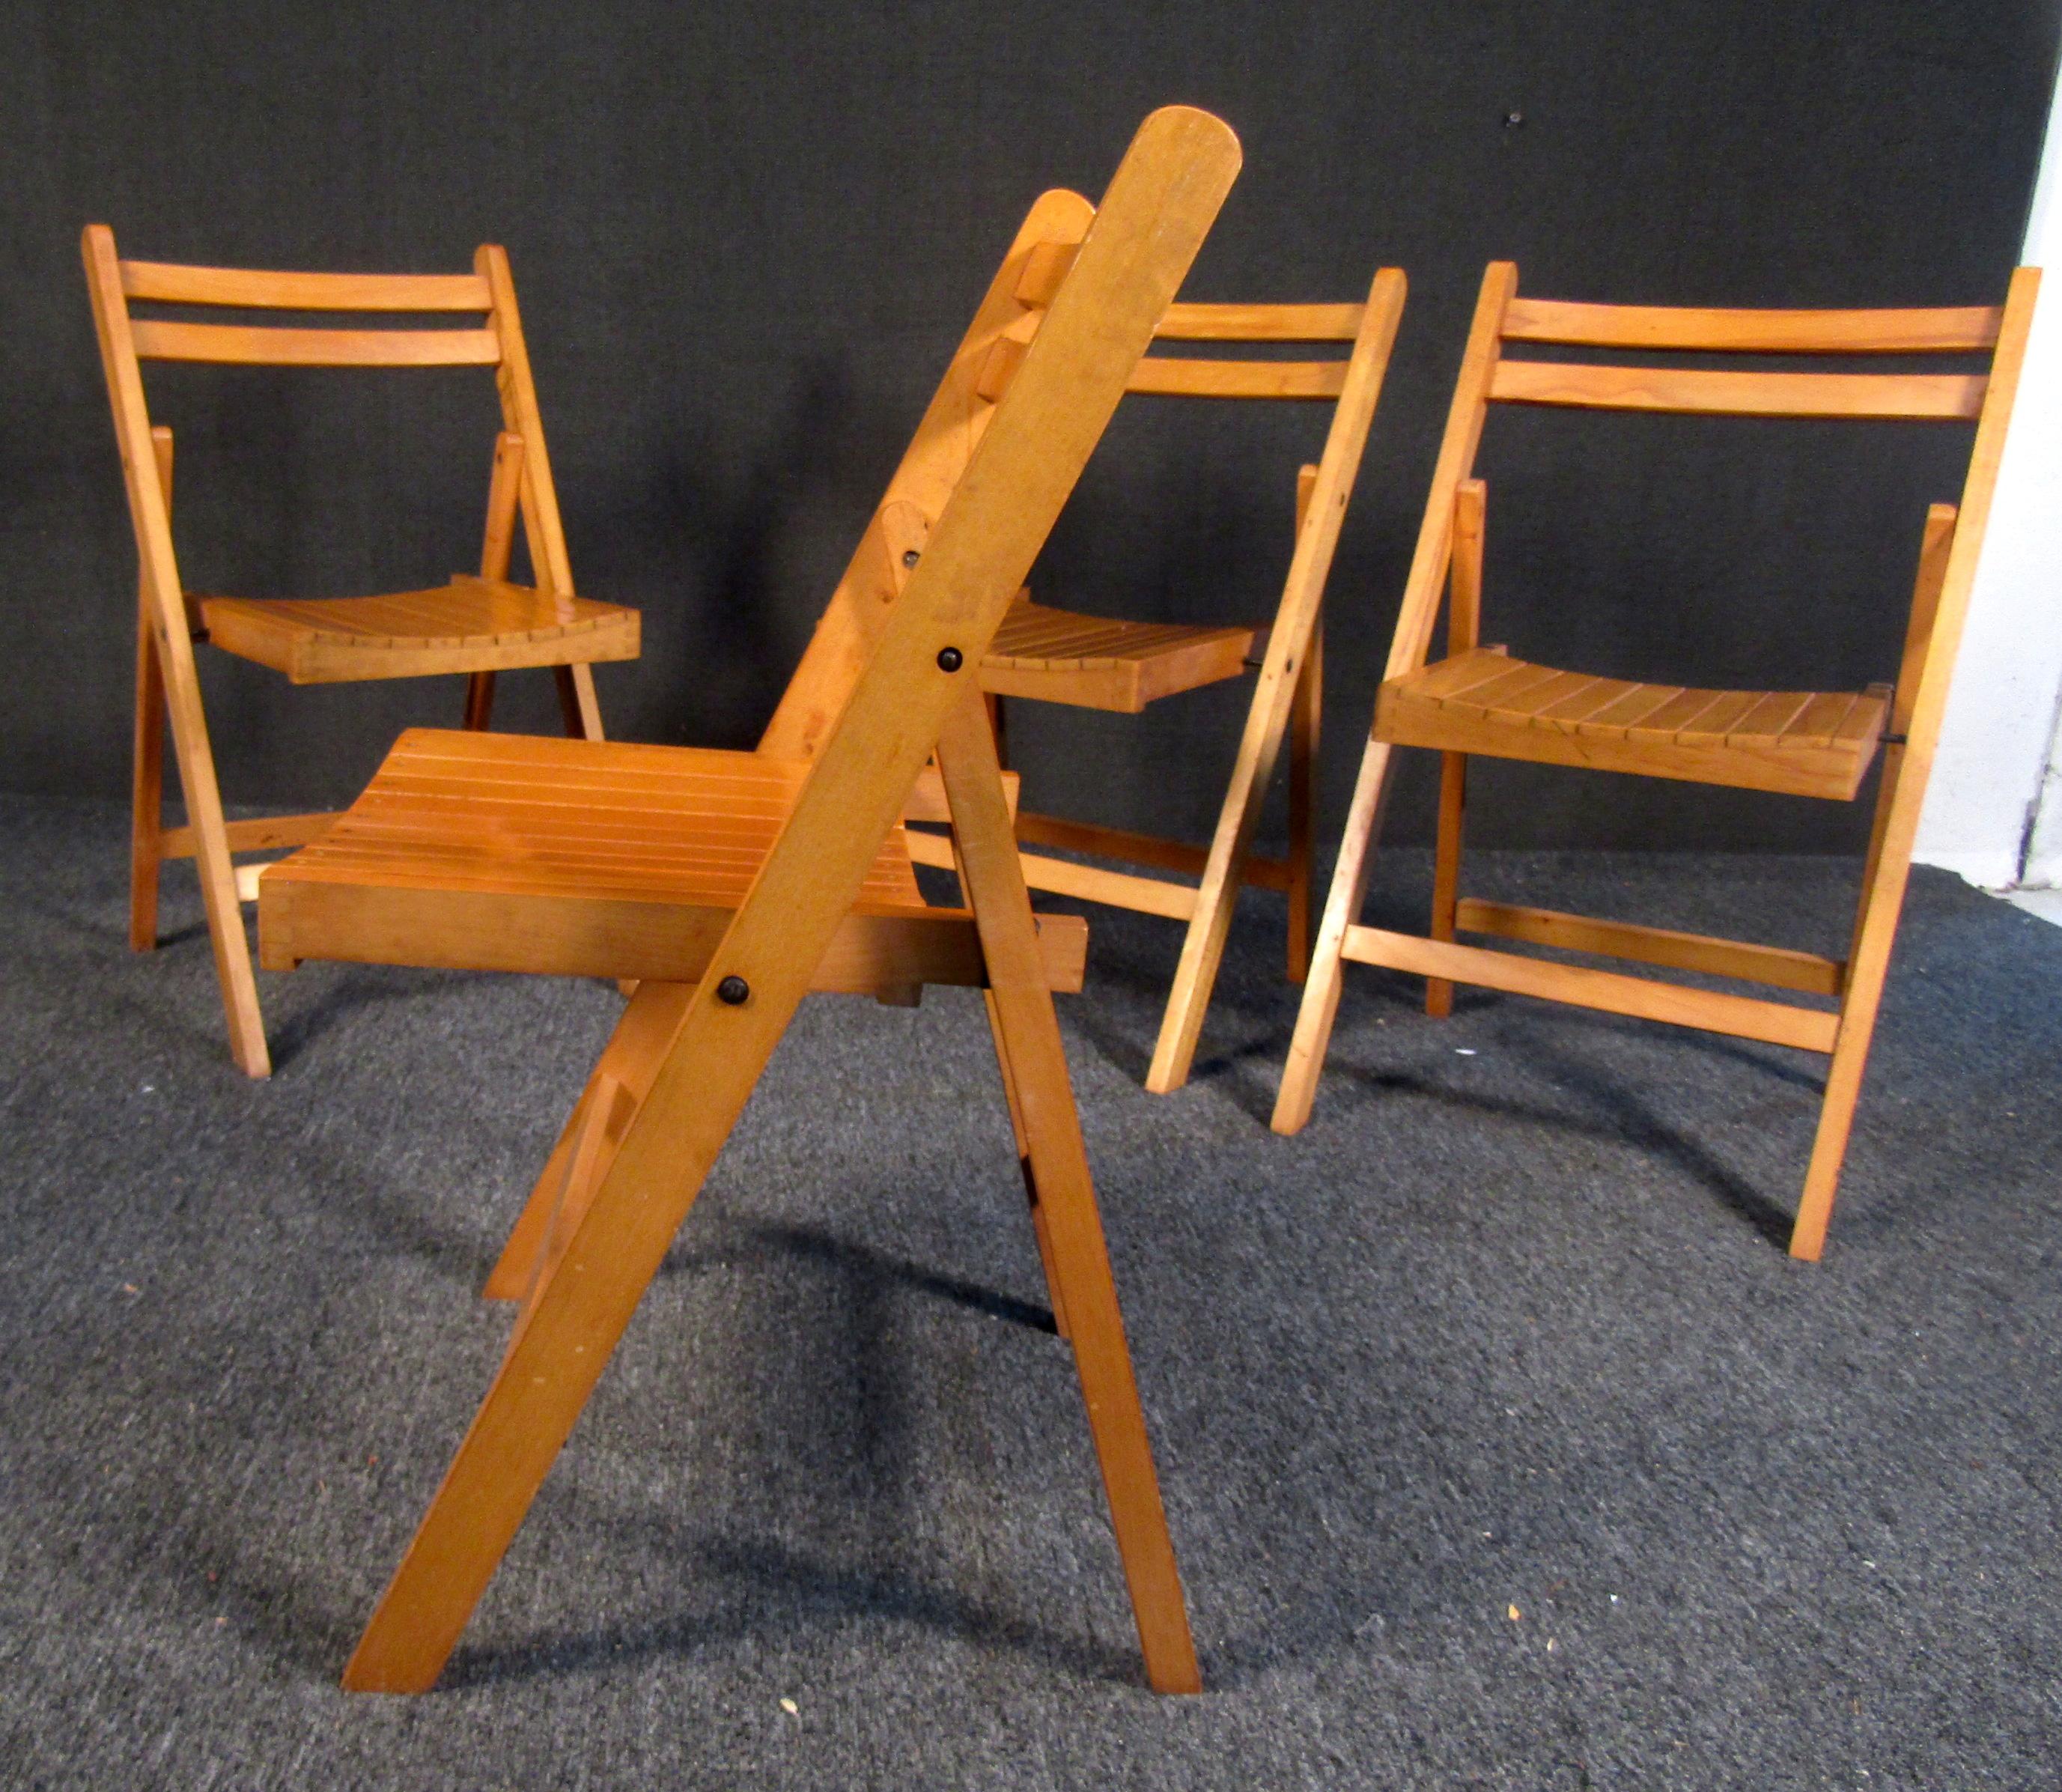 Vintage Modern Slat Folding Chairs In Good Condition For Sale In Brooklyn, NY